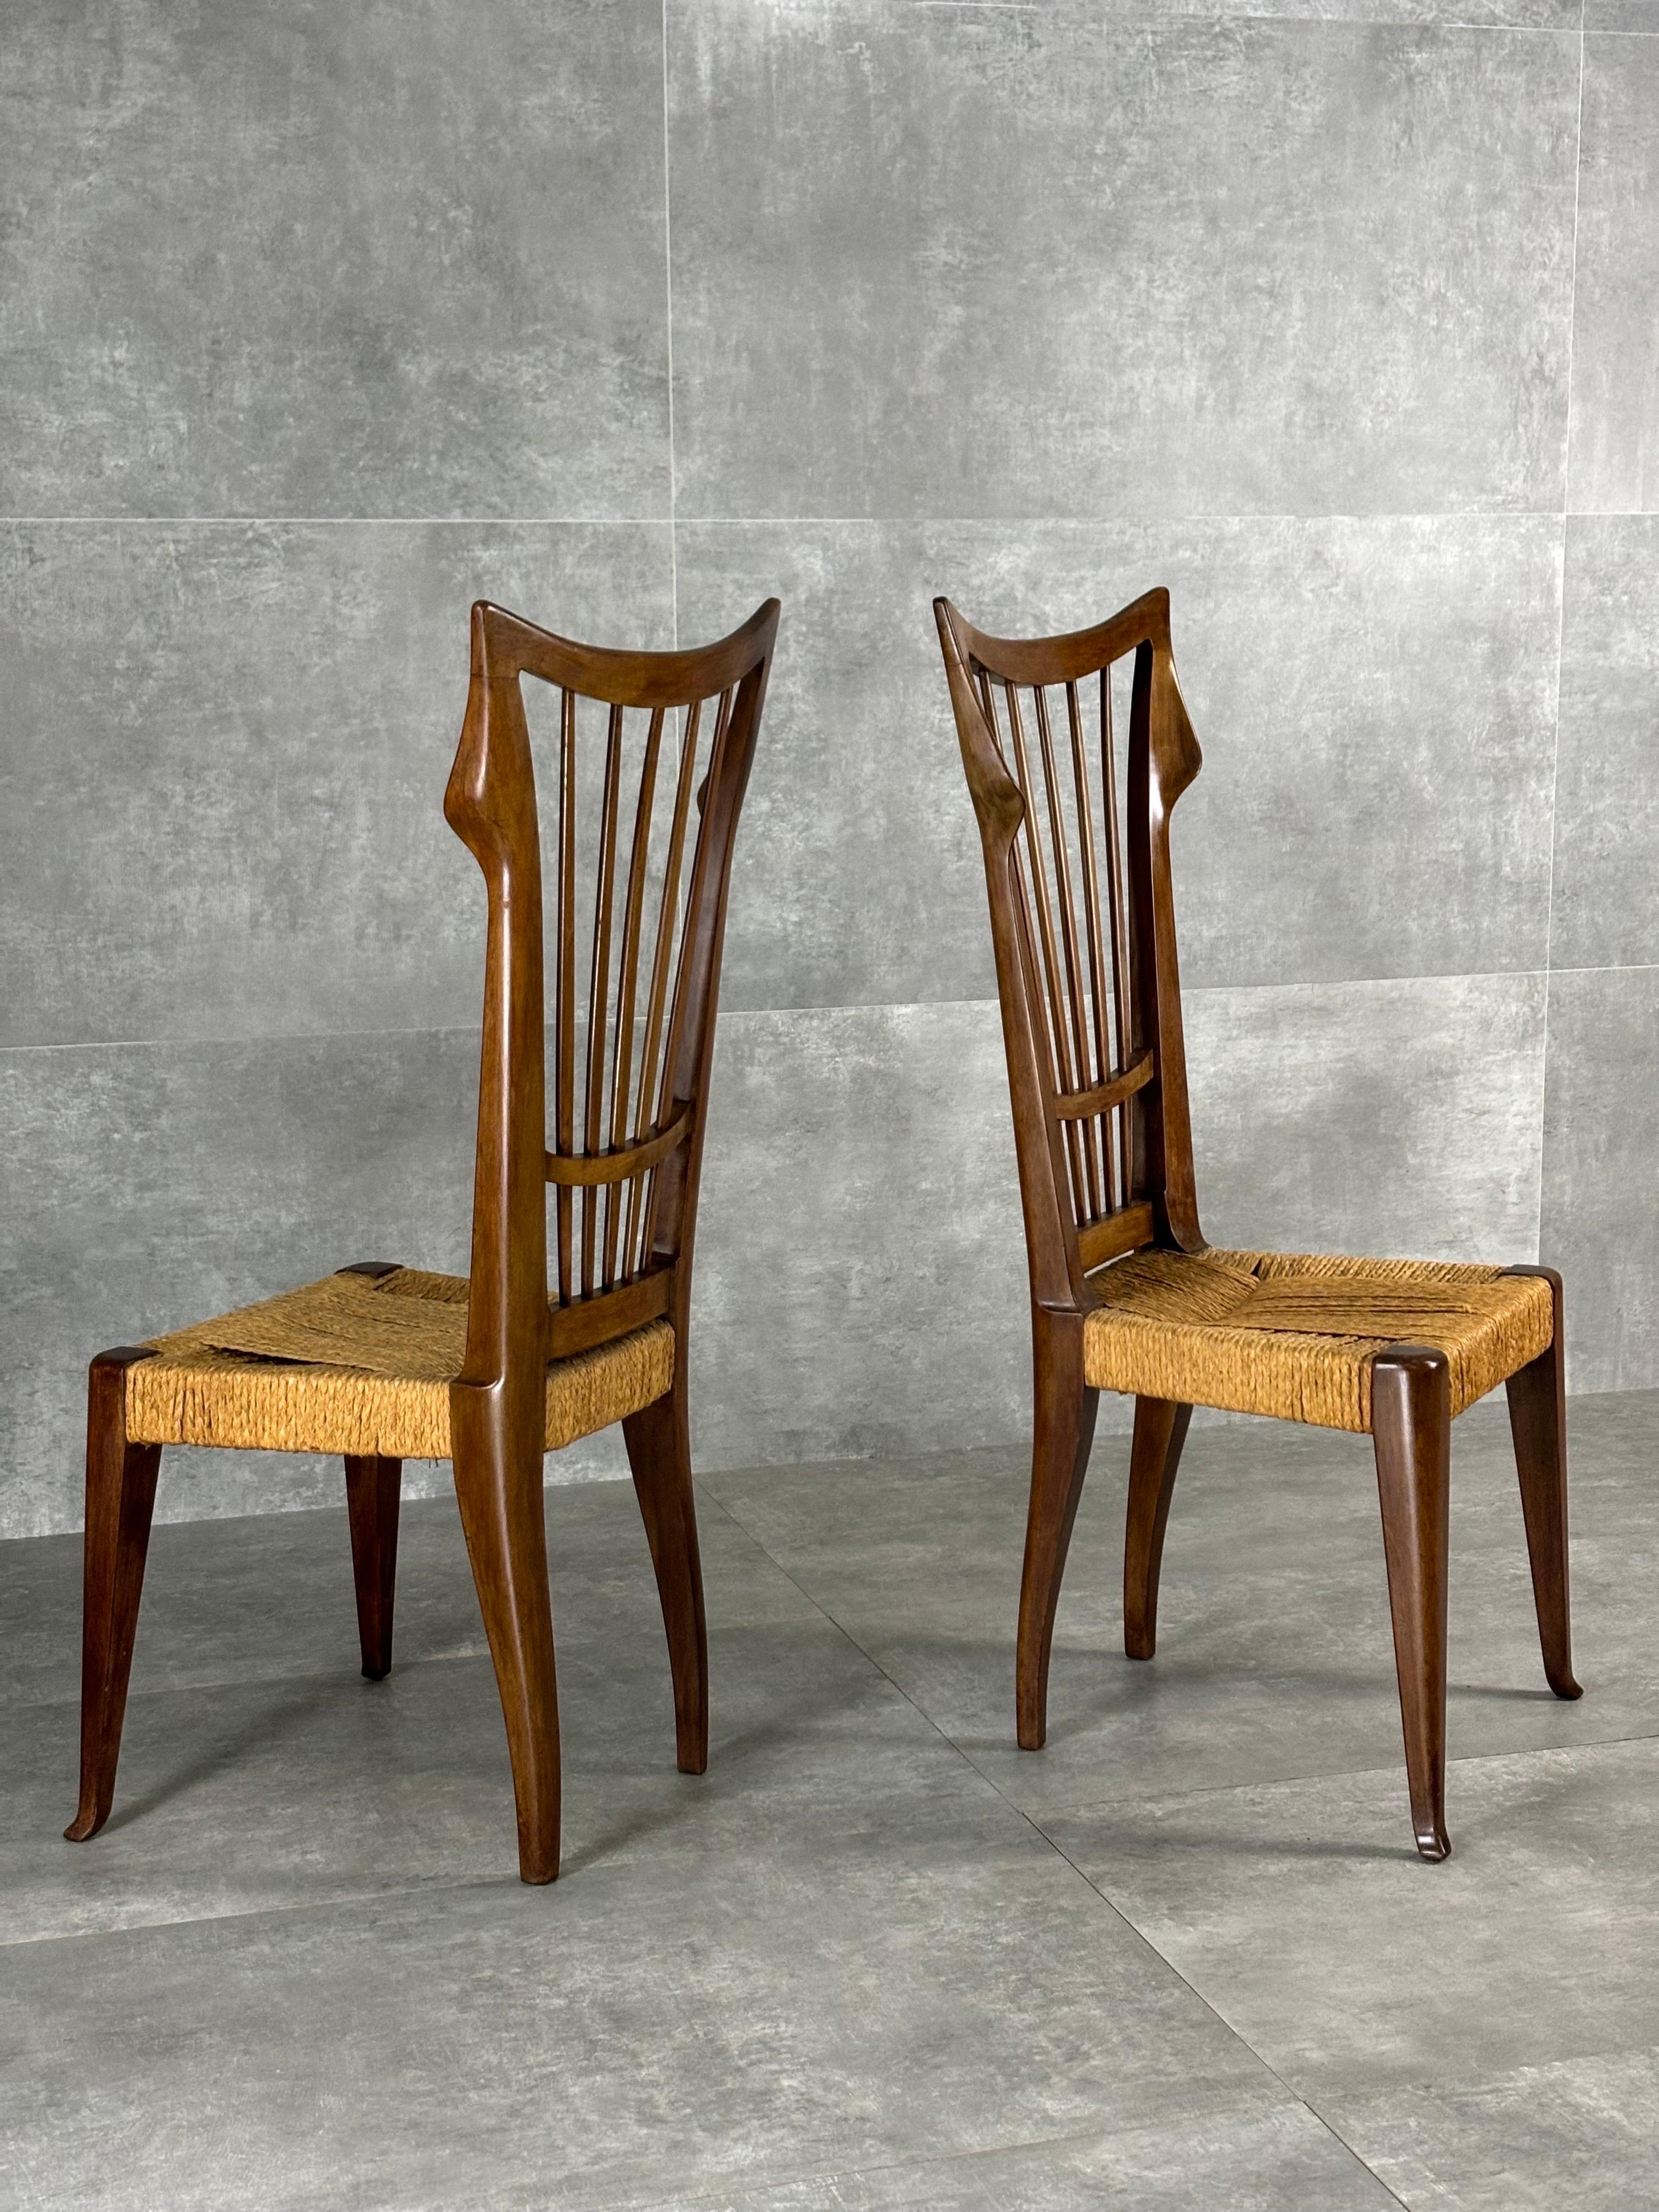 Chairs by Guglielmo Pecorini with straw seat, 1950s, set of 2 For Sale 5